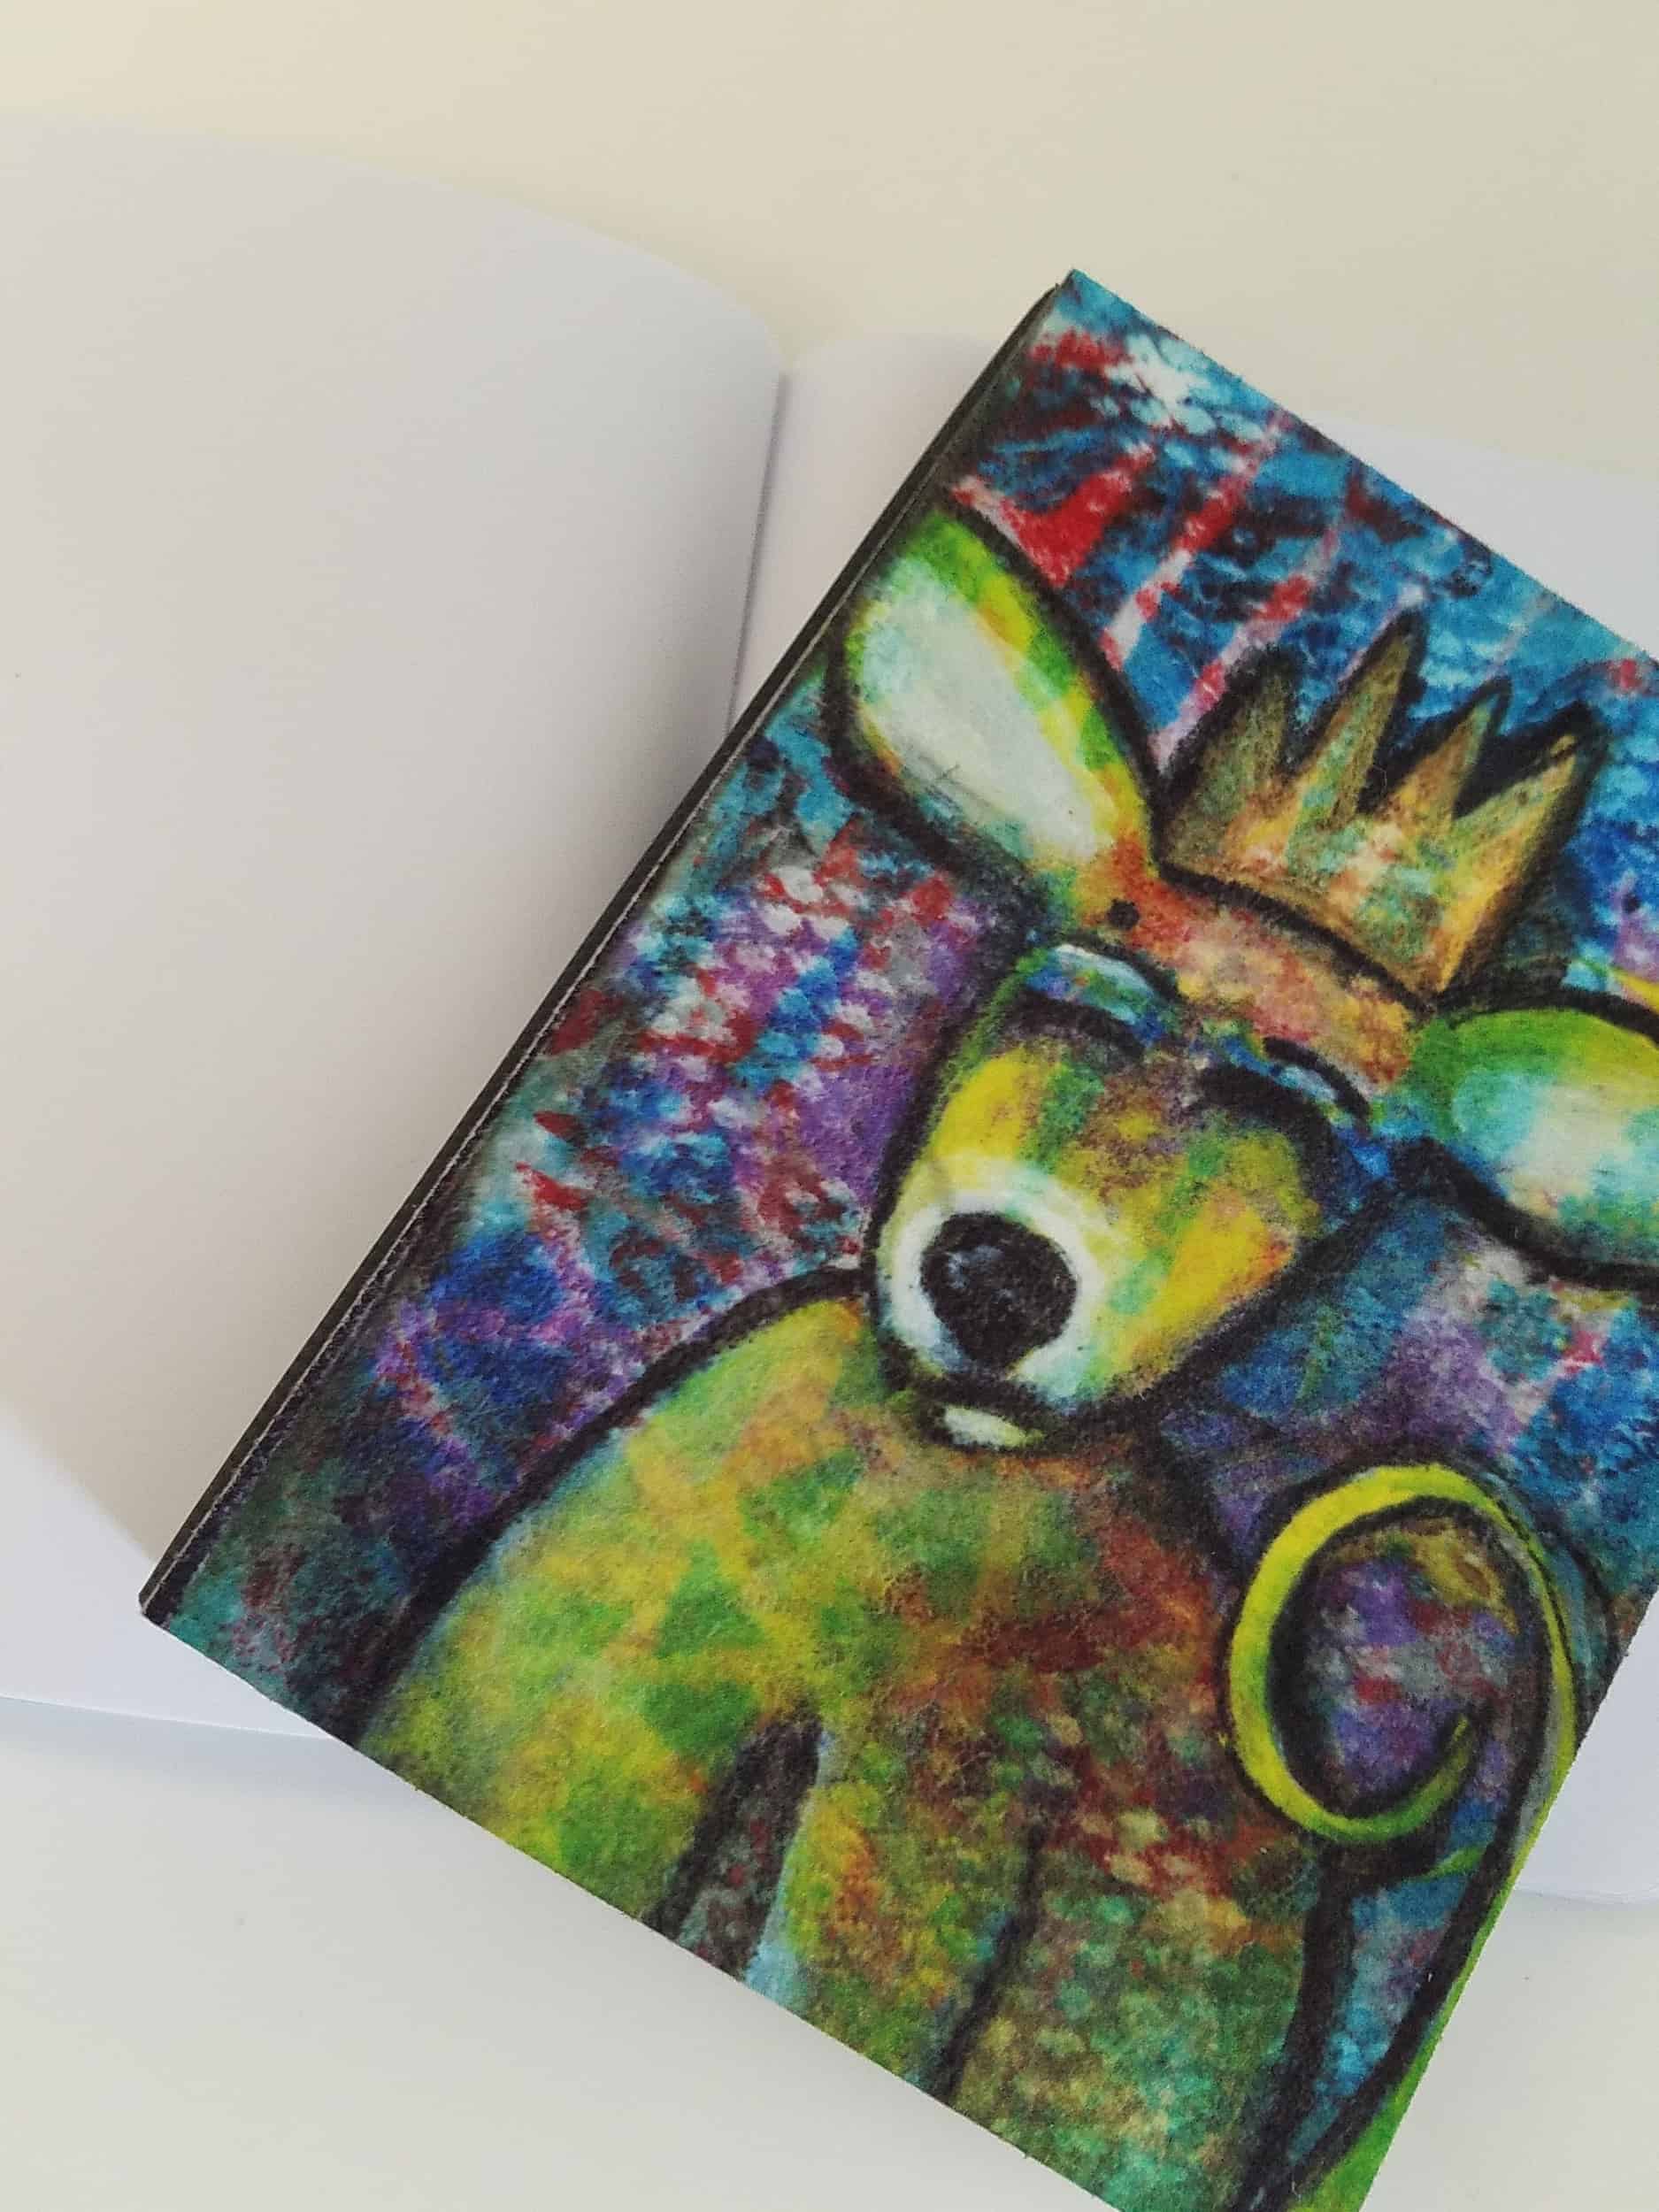 This "Barkley" Crowned Critter Small Blank Journal for notes, lists, sketching and planning is made with love by Studio Patty D! Shop more unique gift ideas today with Spots Initiatives, the best way to support creators.